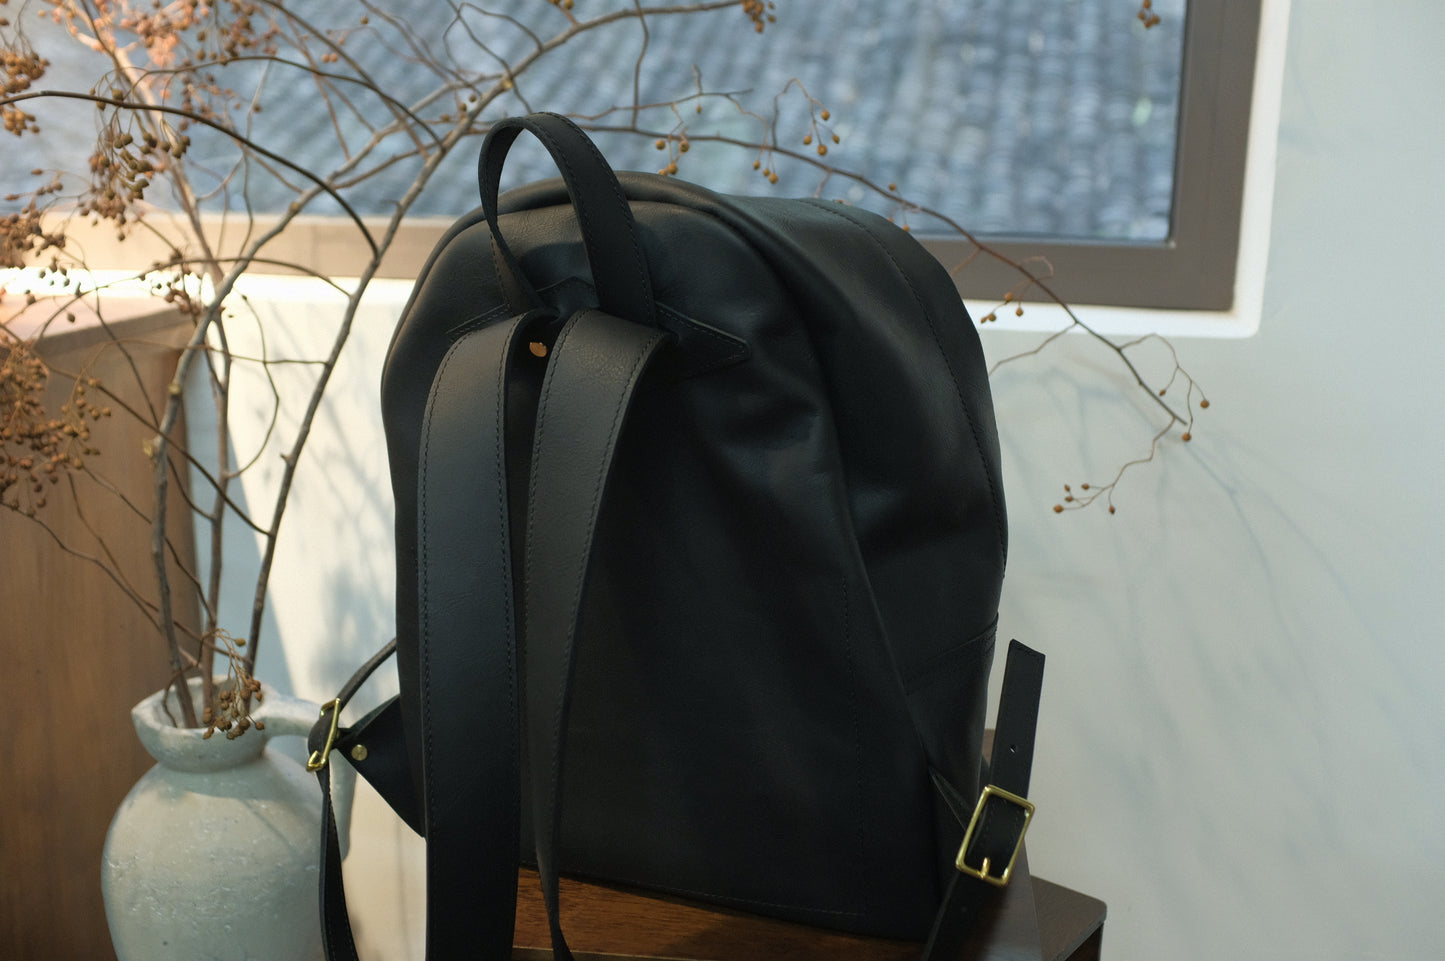 Backpack for workers